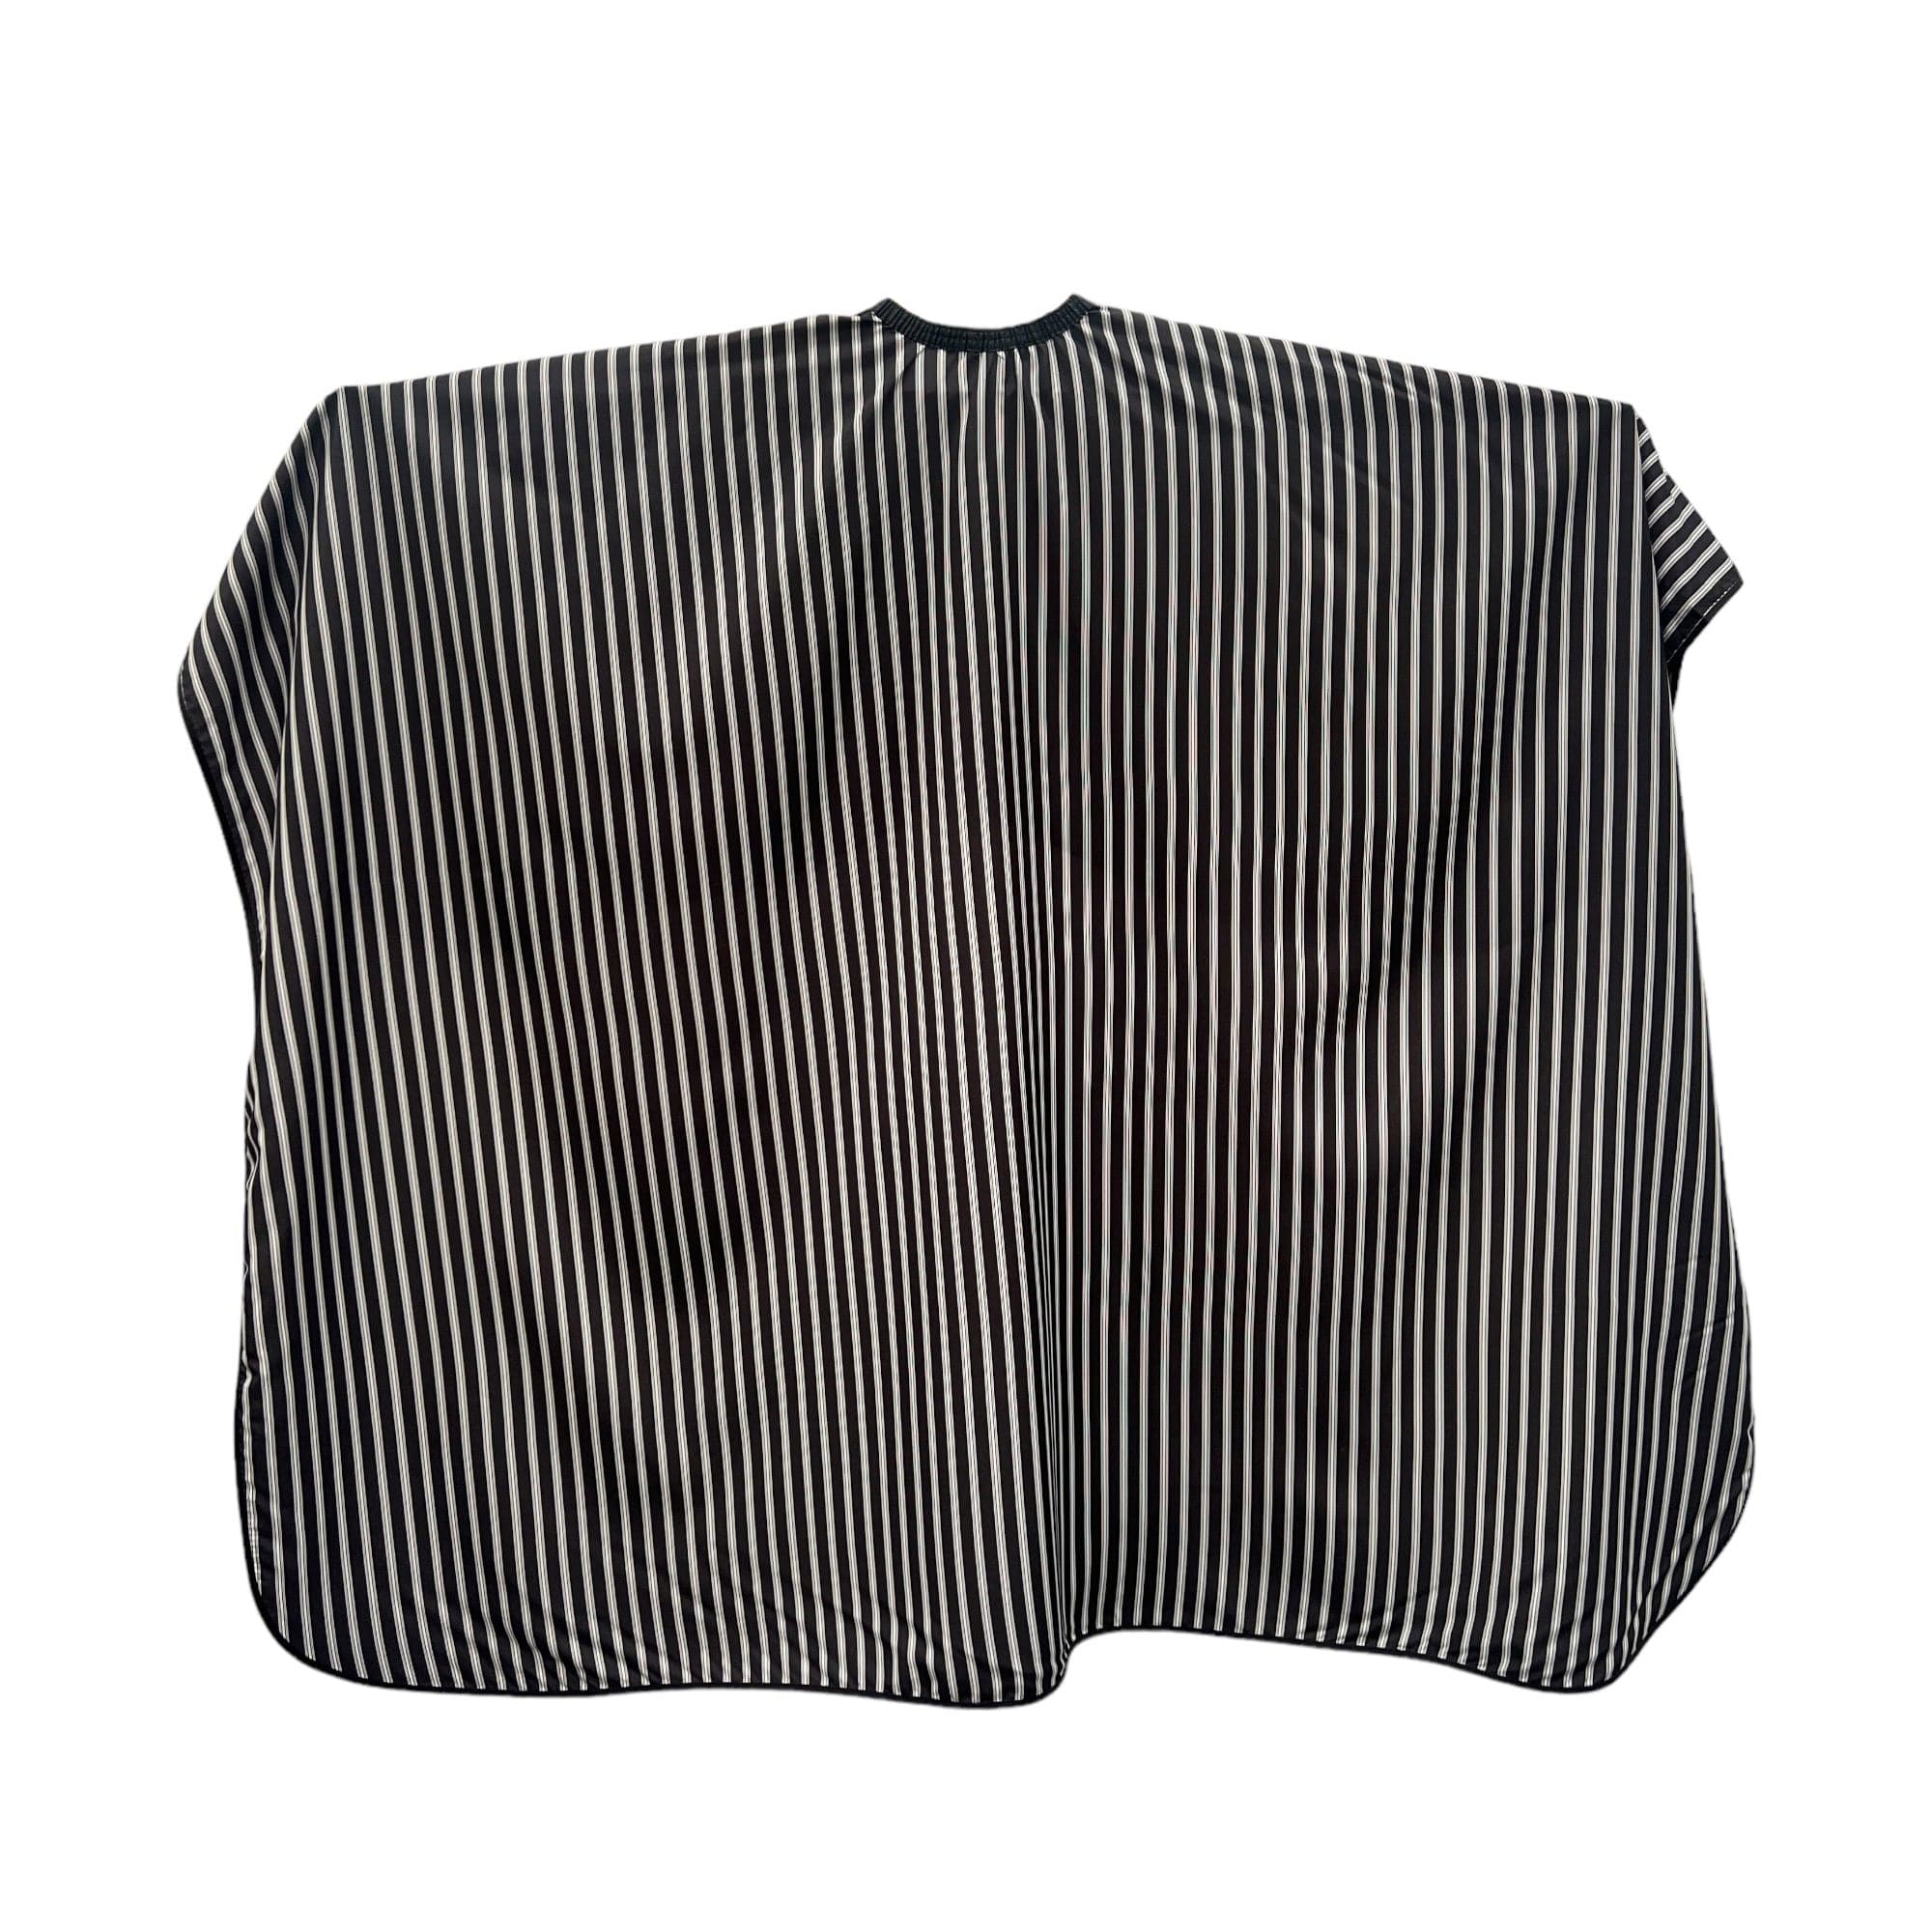 Gabri - Barber Hairdressing Hair Cutting Capes & Gowns Stripes (Black and White)